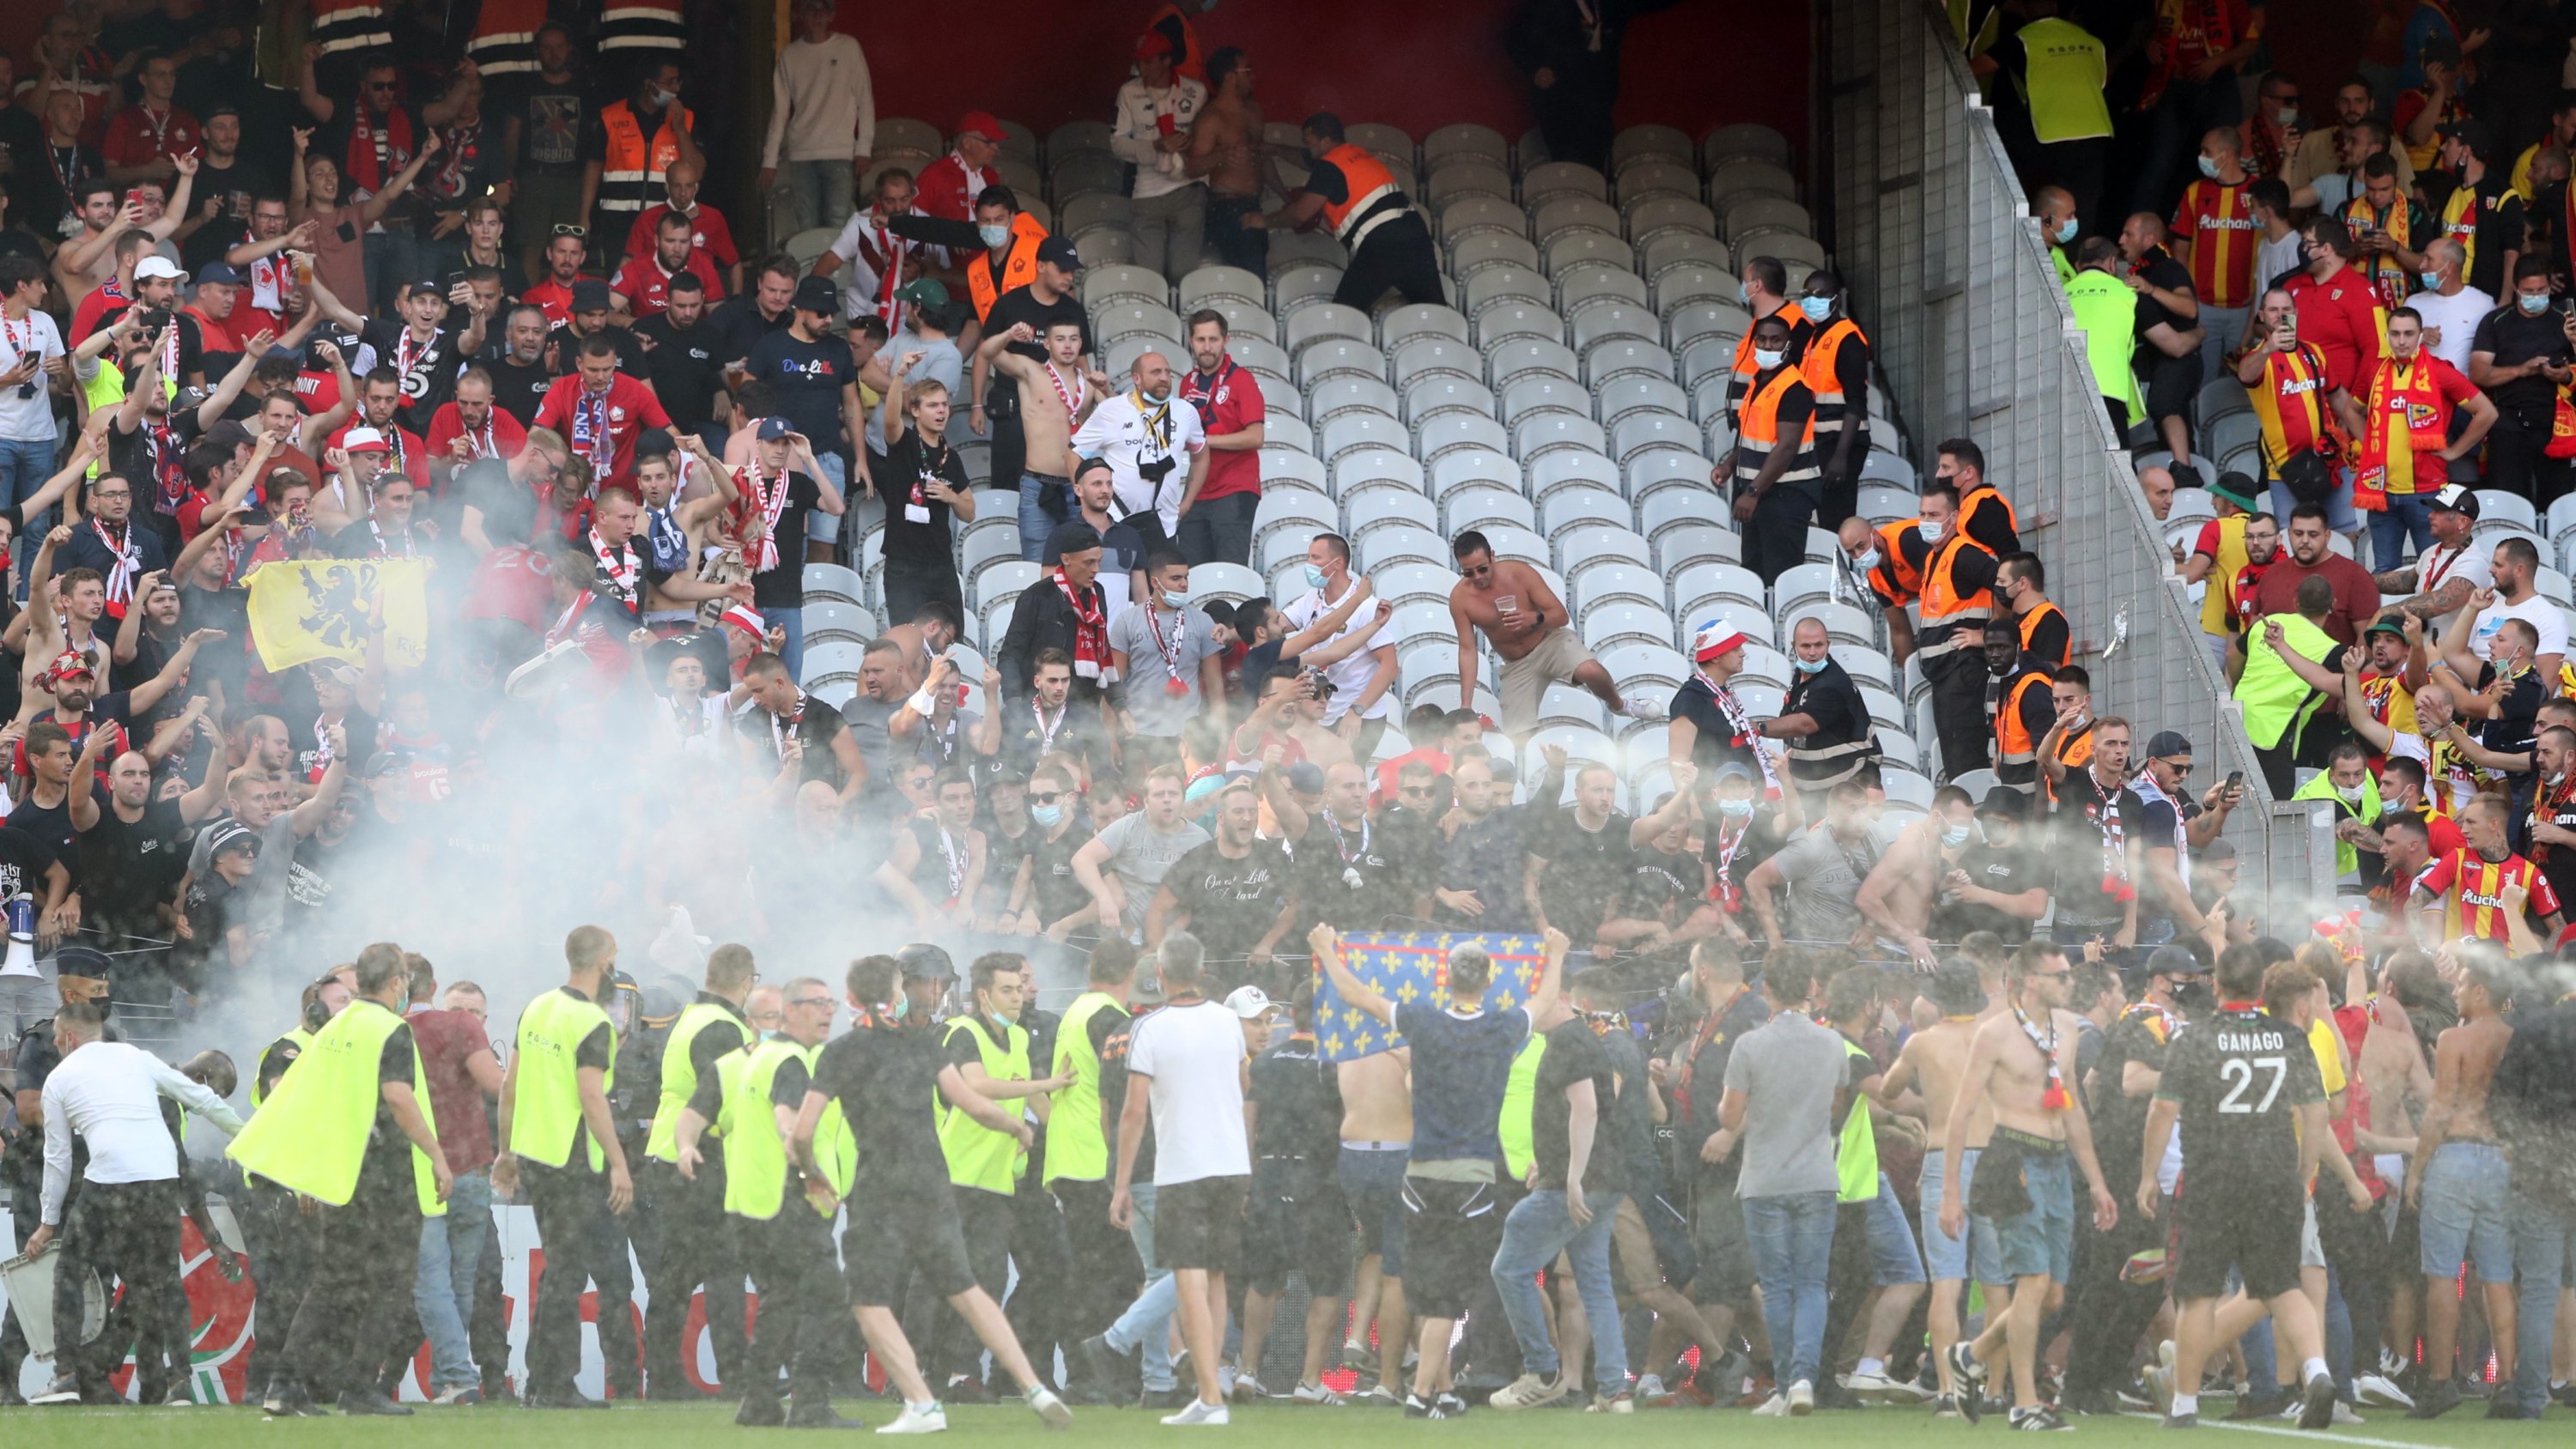 Police and stewards intervene as Lens supporters invade the pitch during the French Ligue 1 match against Lille at the Stade Bollaert-Delelis in Lens, France, Sept. 18, 2021. (Reuters Photo)